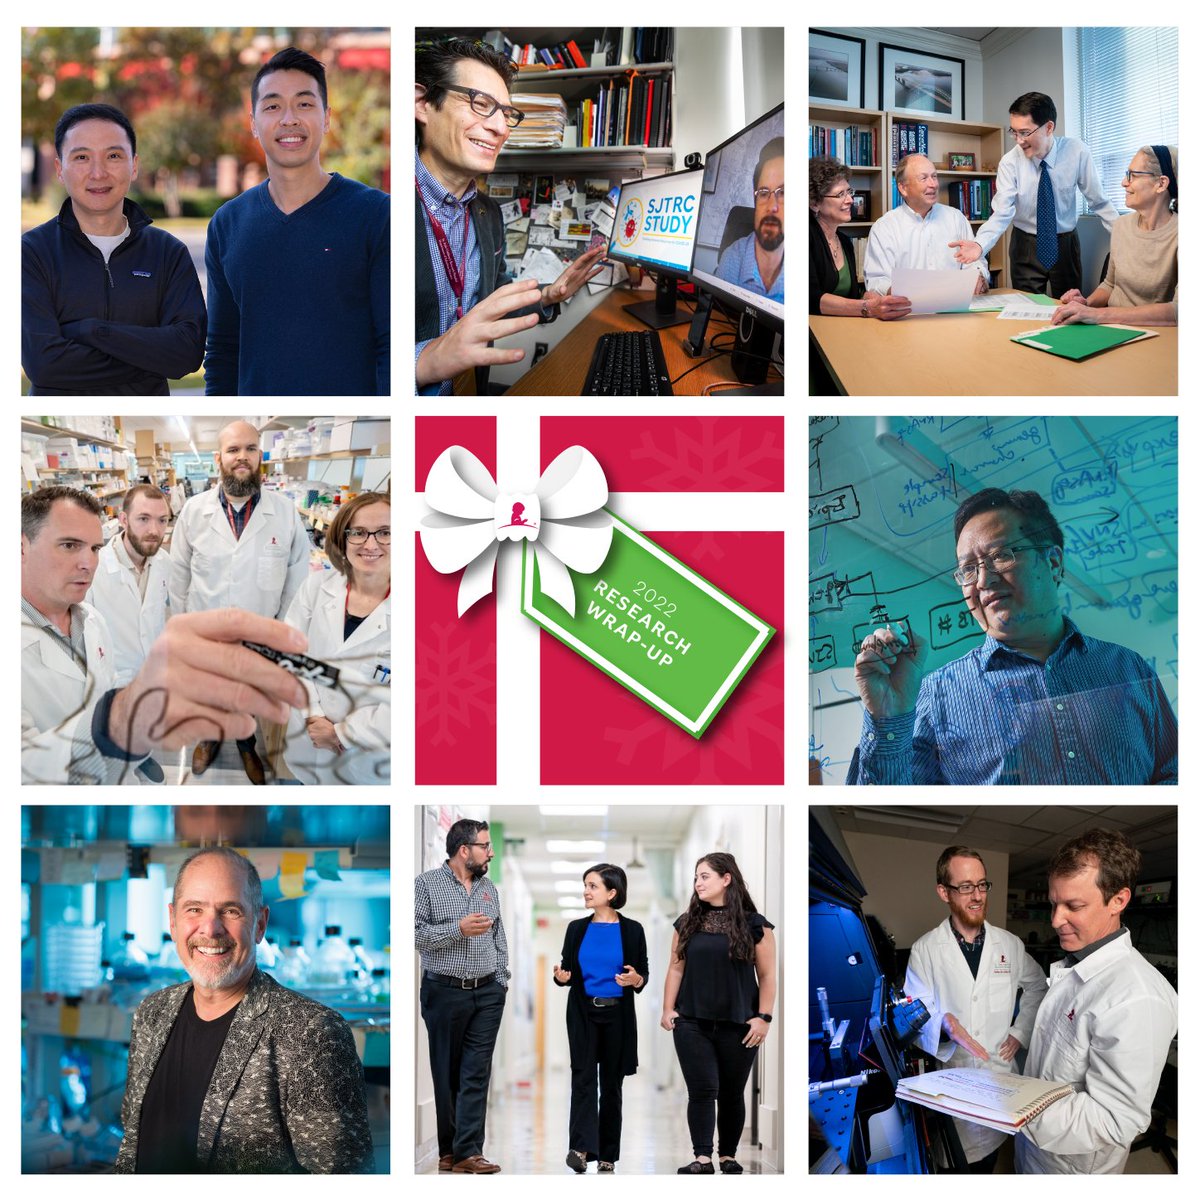 In 2022, our scientists advanced research in hemoglobin expression, cancer survivorship, CAR-T, COVID-19, #smFRET and more. We’re writing the next chapter of St. Jude history through their work. ICYMI, explore this year’s accomplishments. stjude.org/research-news #ResearchWrapUp